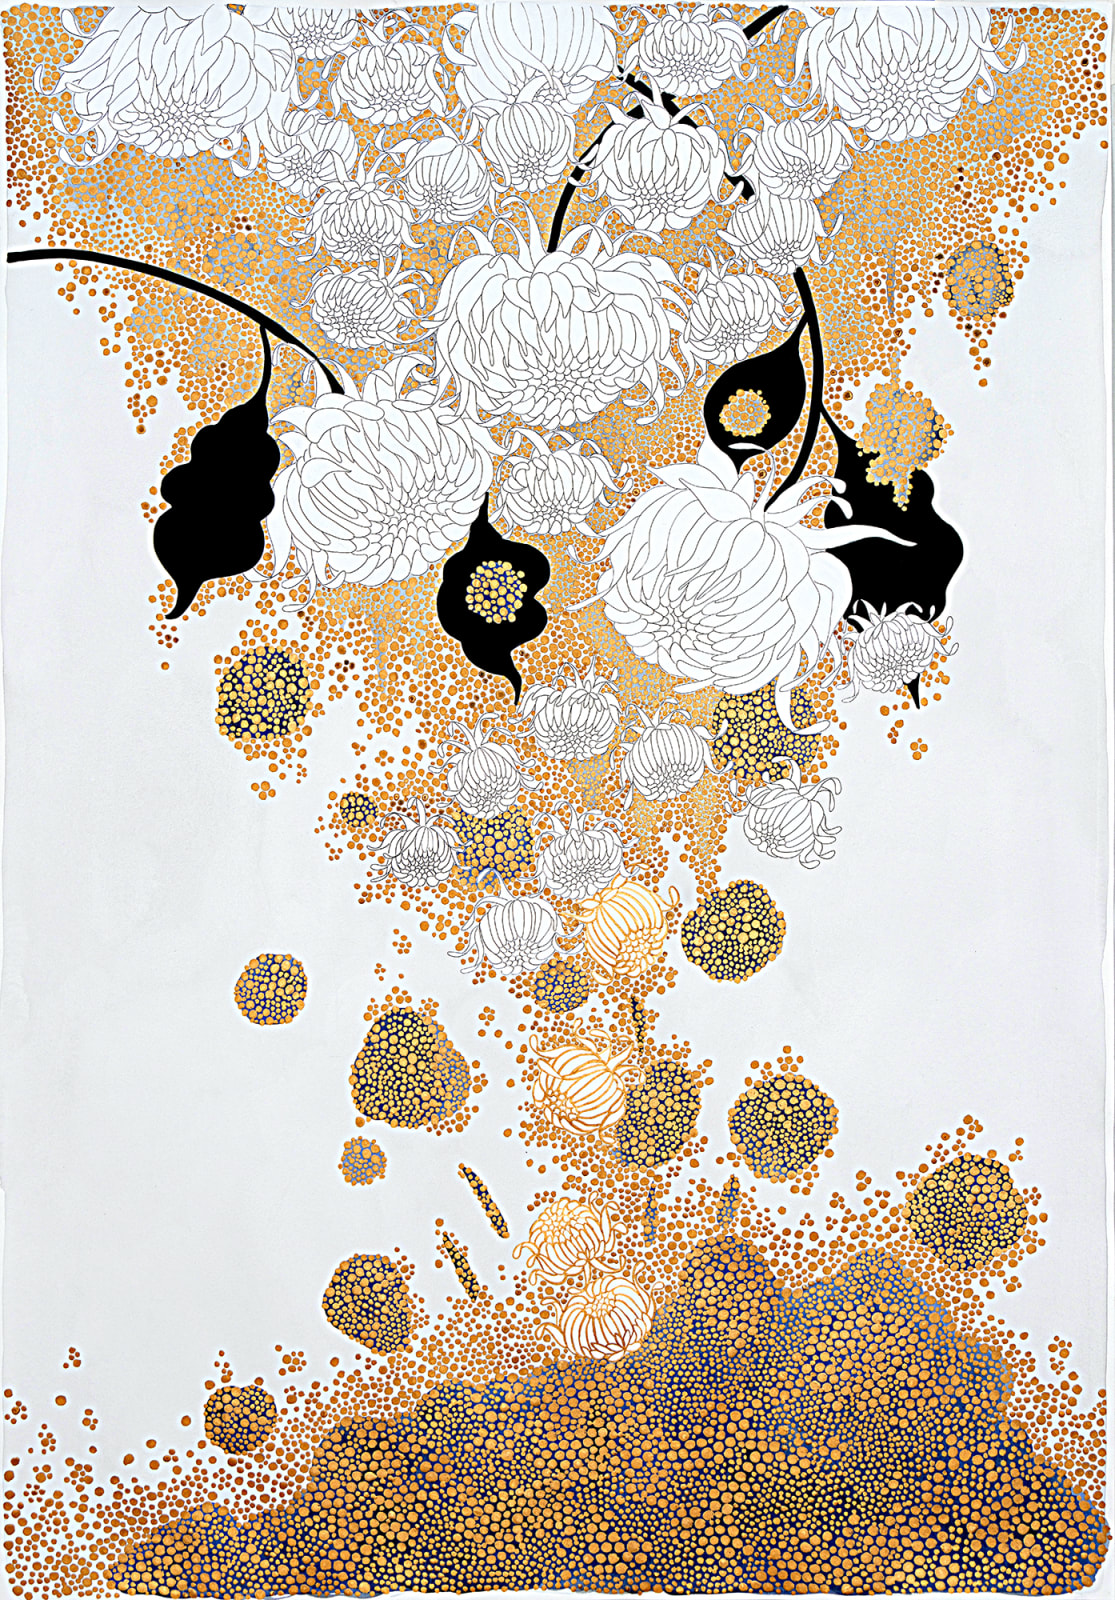 Crystal Liu, the flowers, 'down pour' (IV), 2019